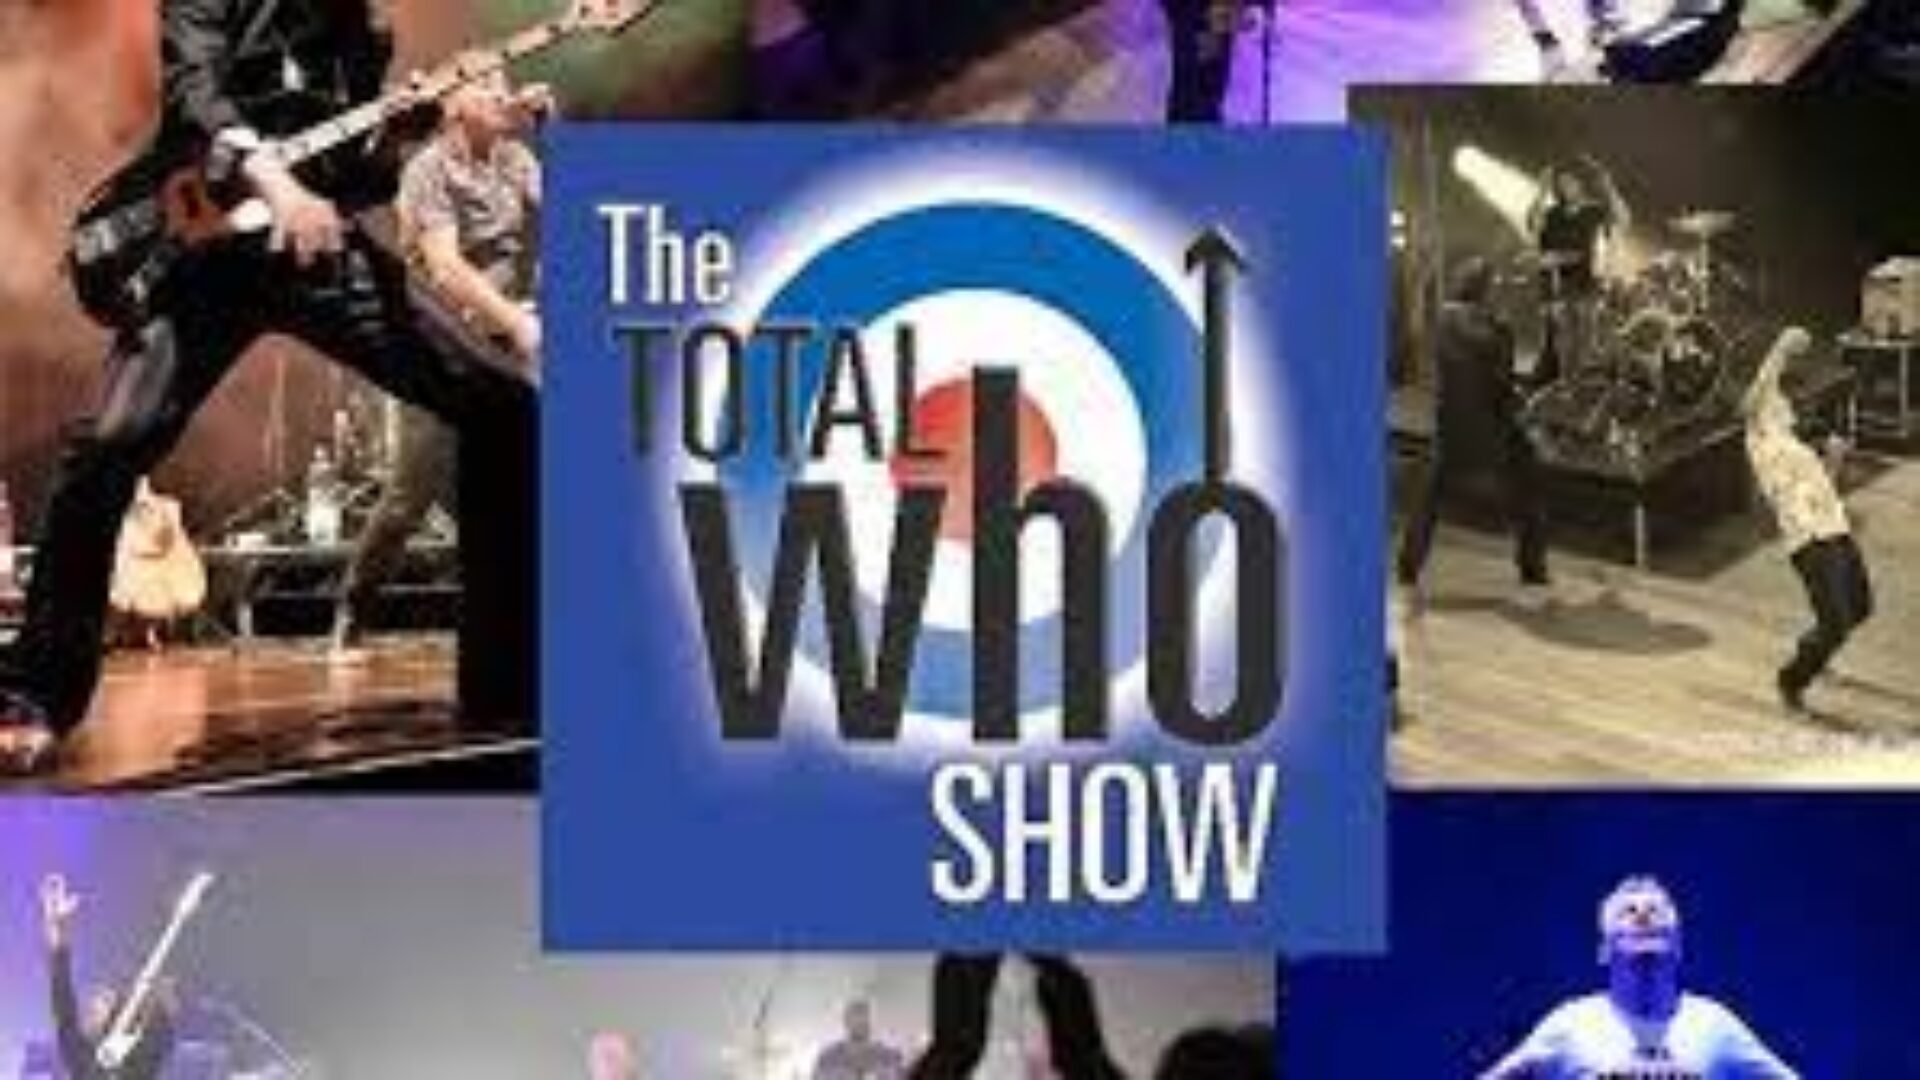 The Total Who Show